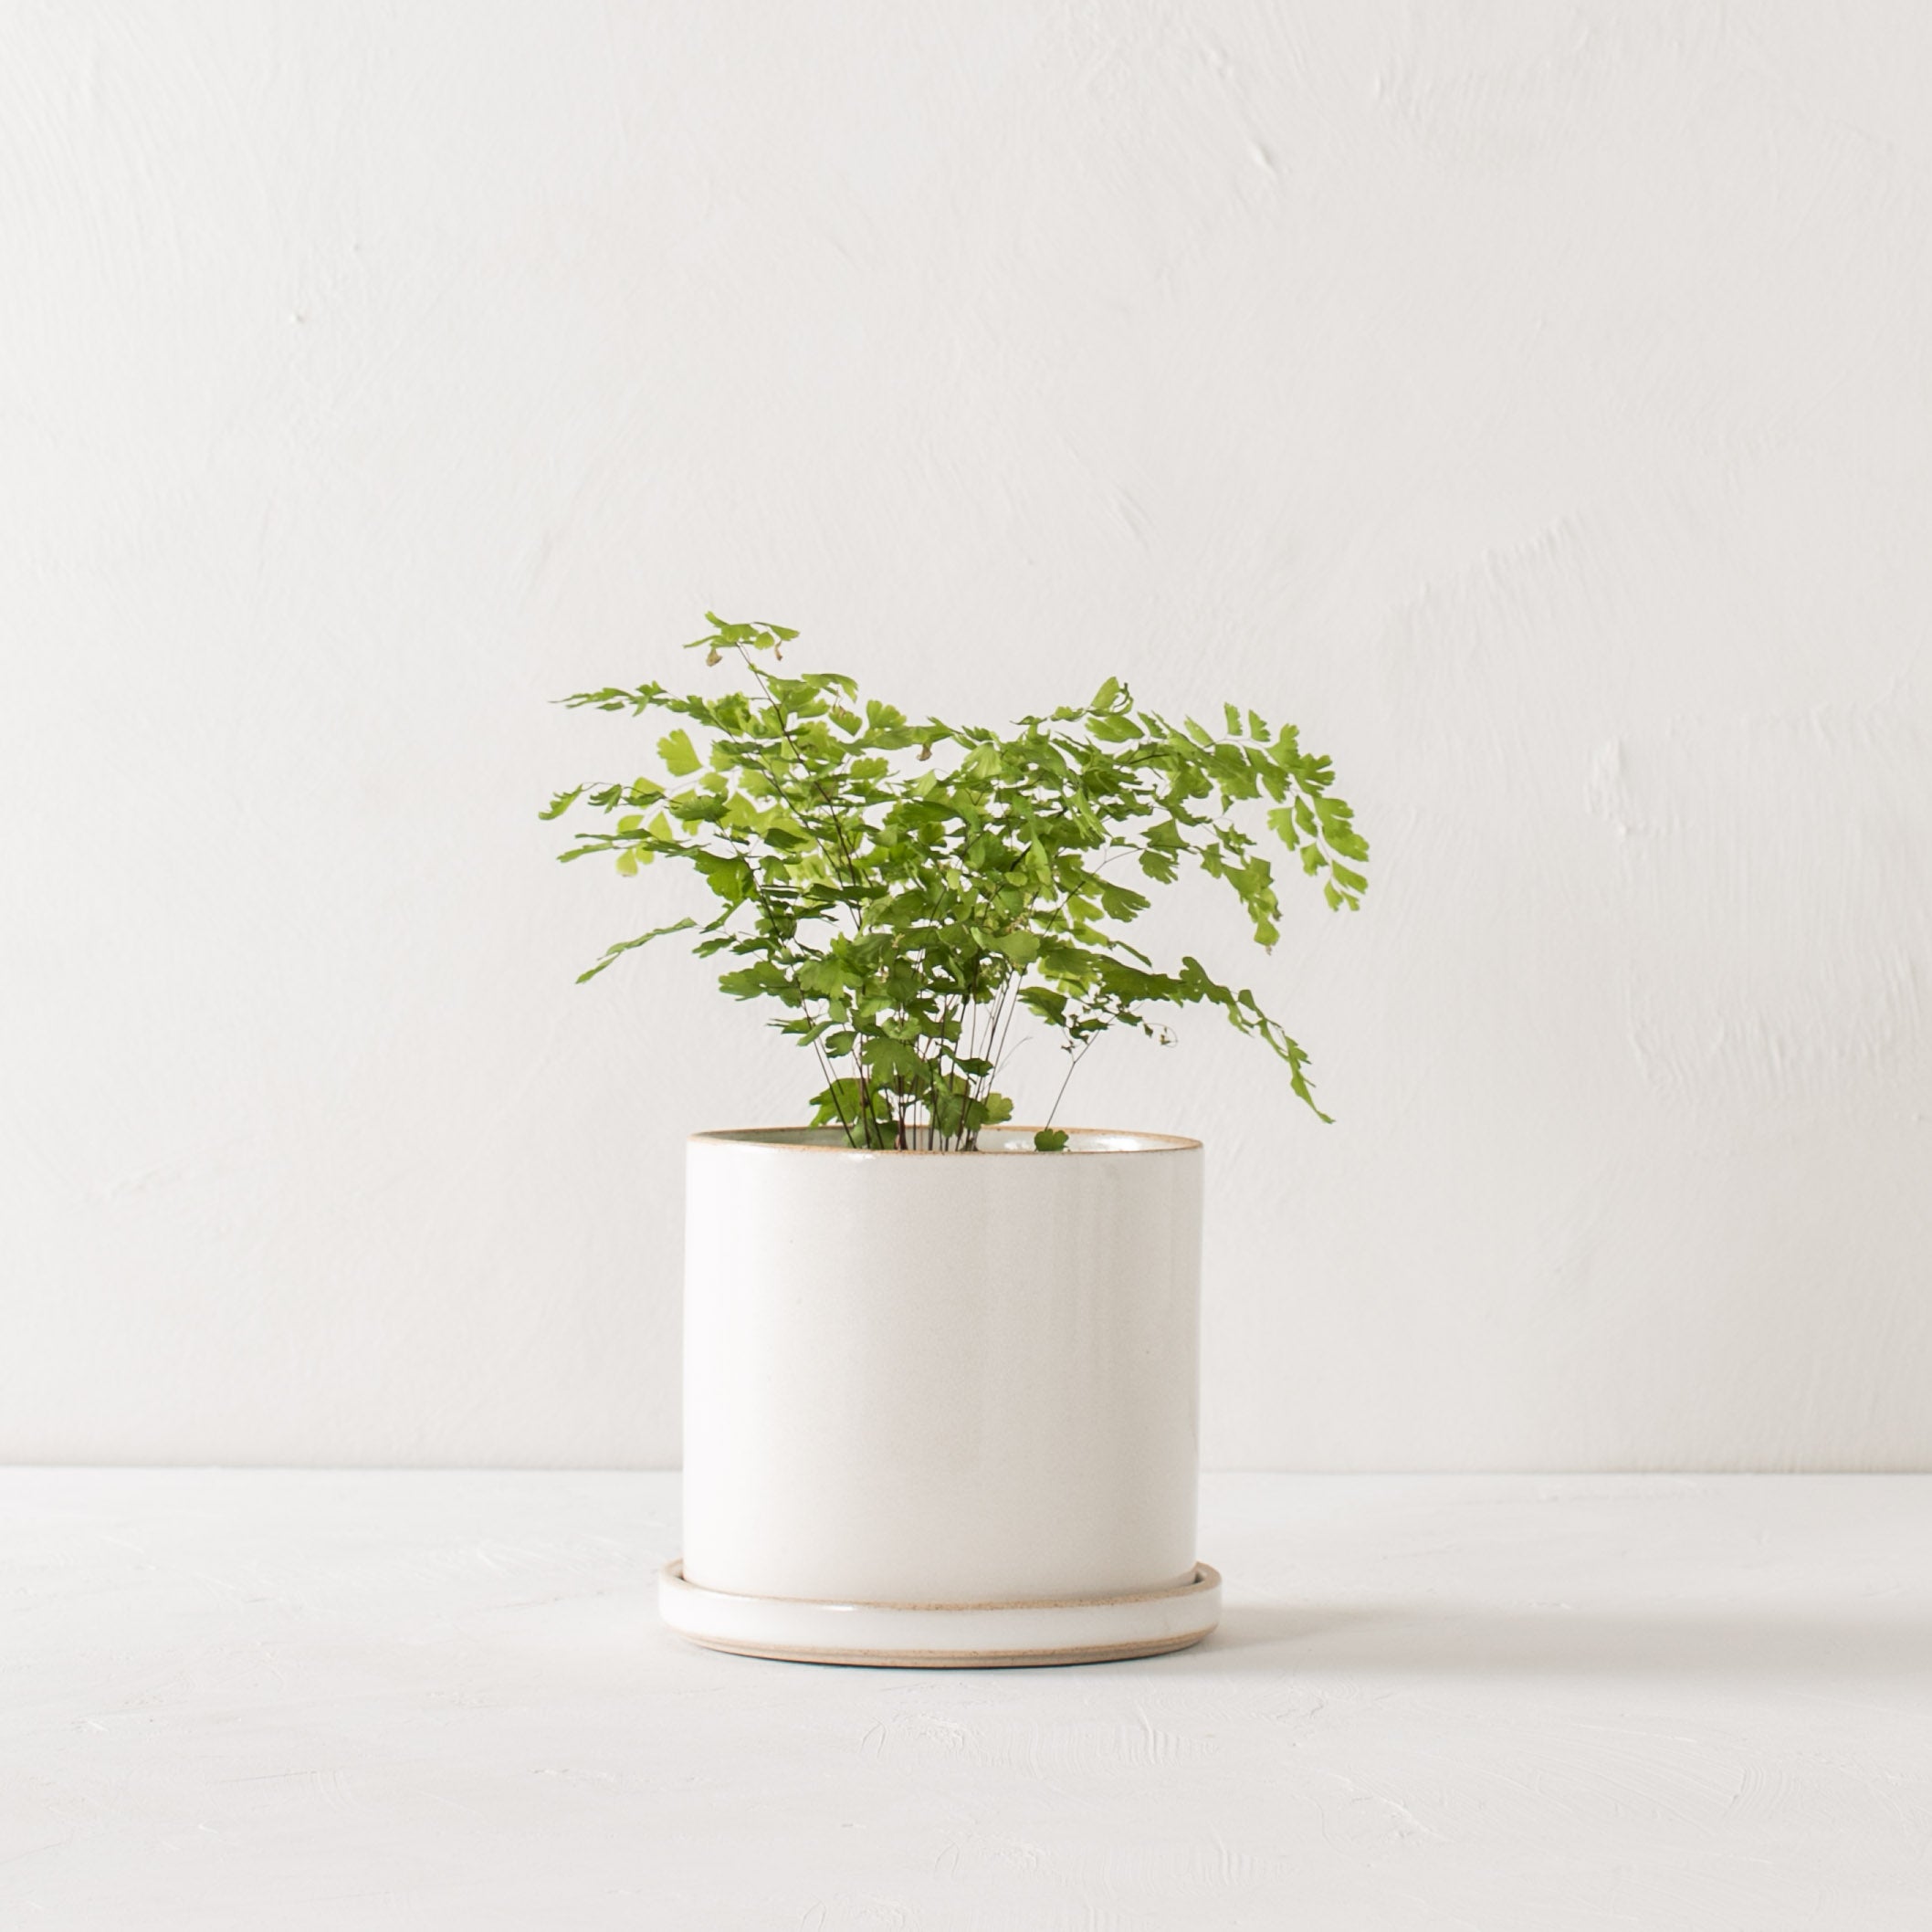 Minimal white 6 inch ceramic planter with bottom drainage dish. Planter houses plant in the center of image on white textured tabletop and white textured backdrop. Handmade ceramic planter, designed and sold by Convivial Production, Kansas City ceramics.